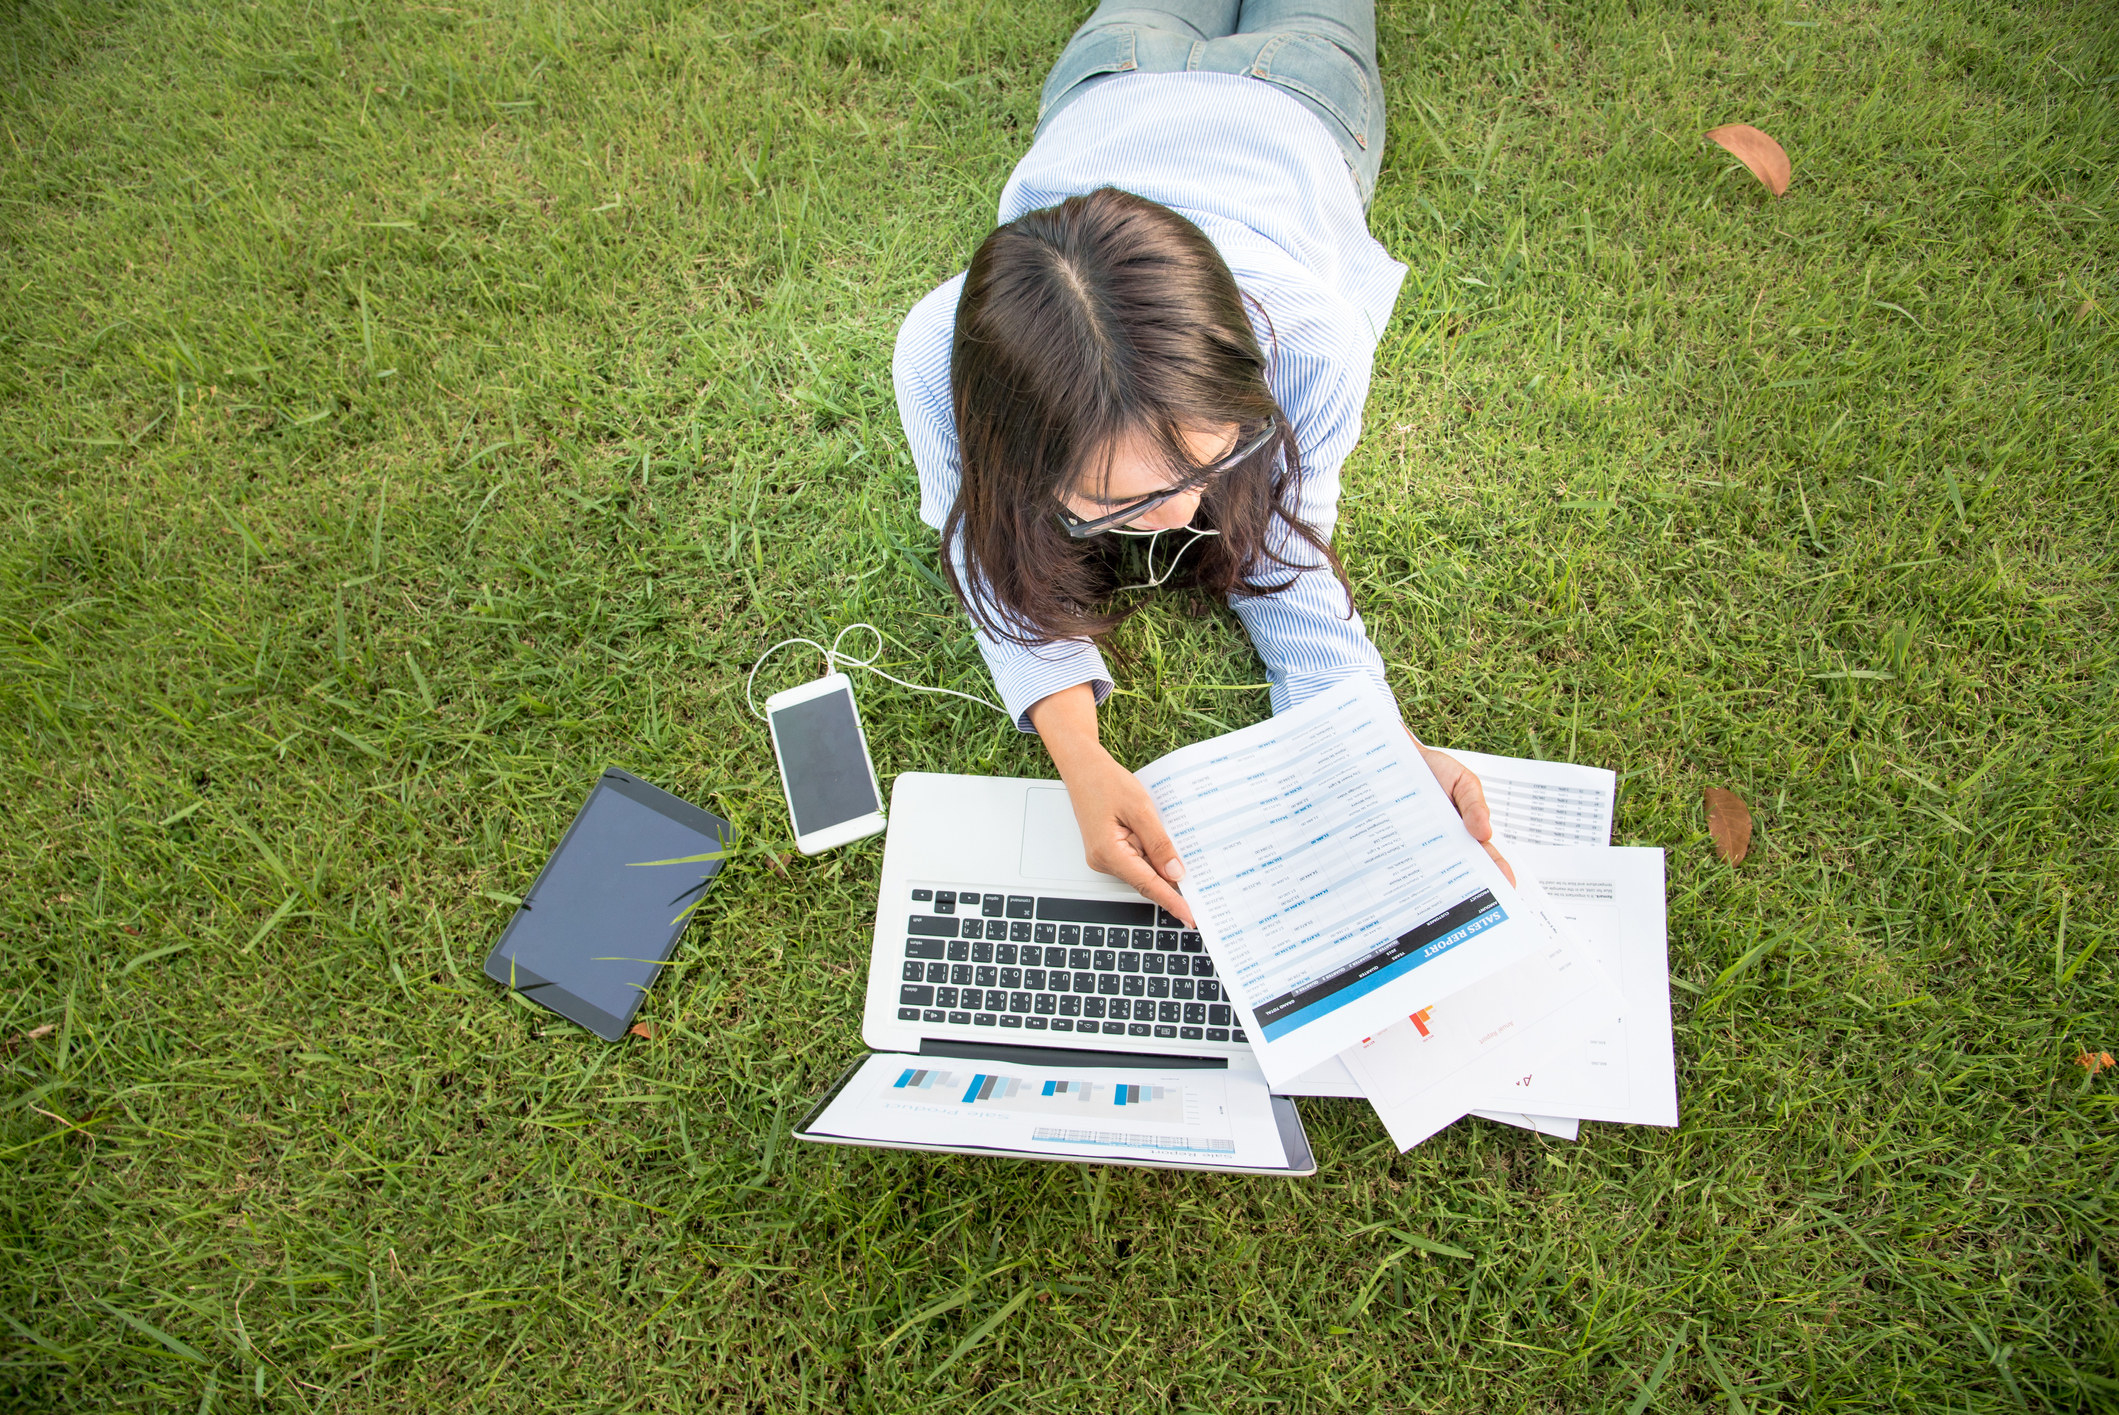 A woman lying on the grass working on a laptop